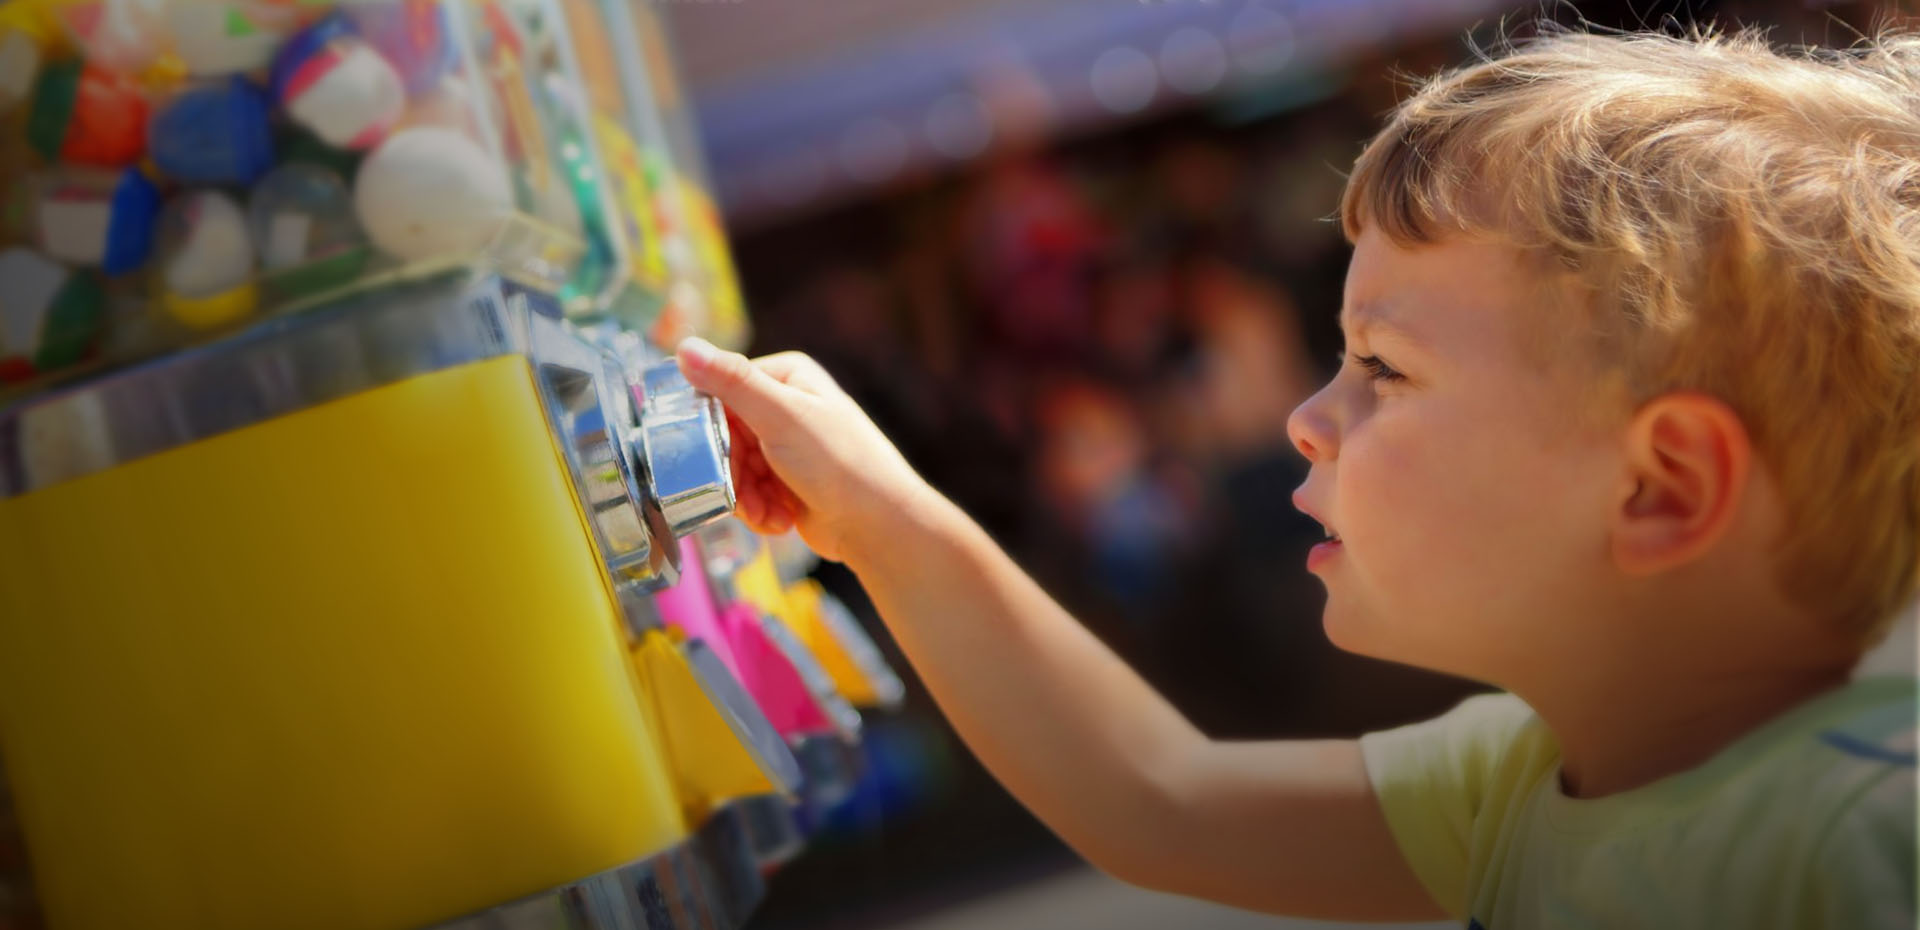 Installers Of Toys Vending Machines For Shopping Centres Hinkley